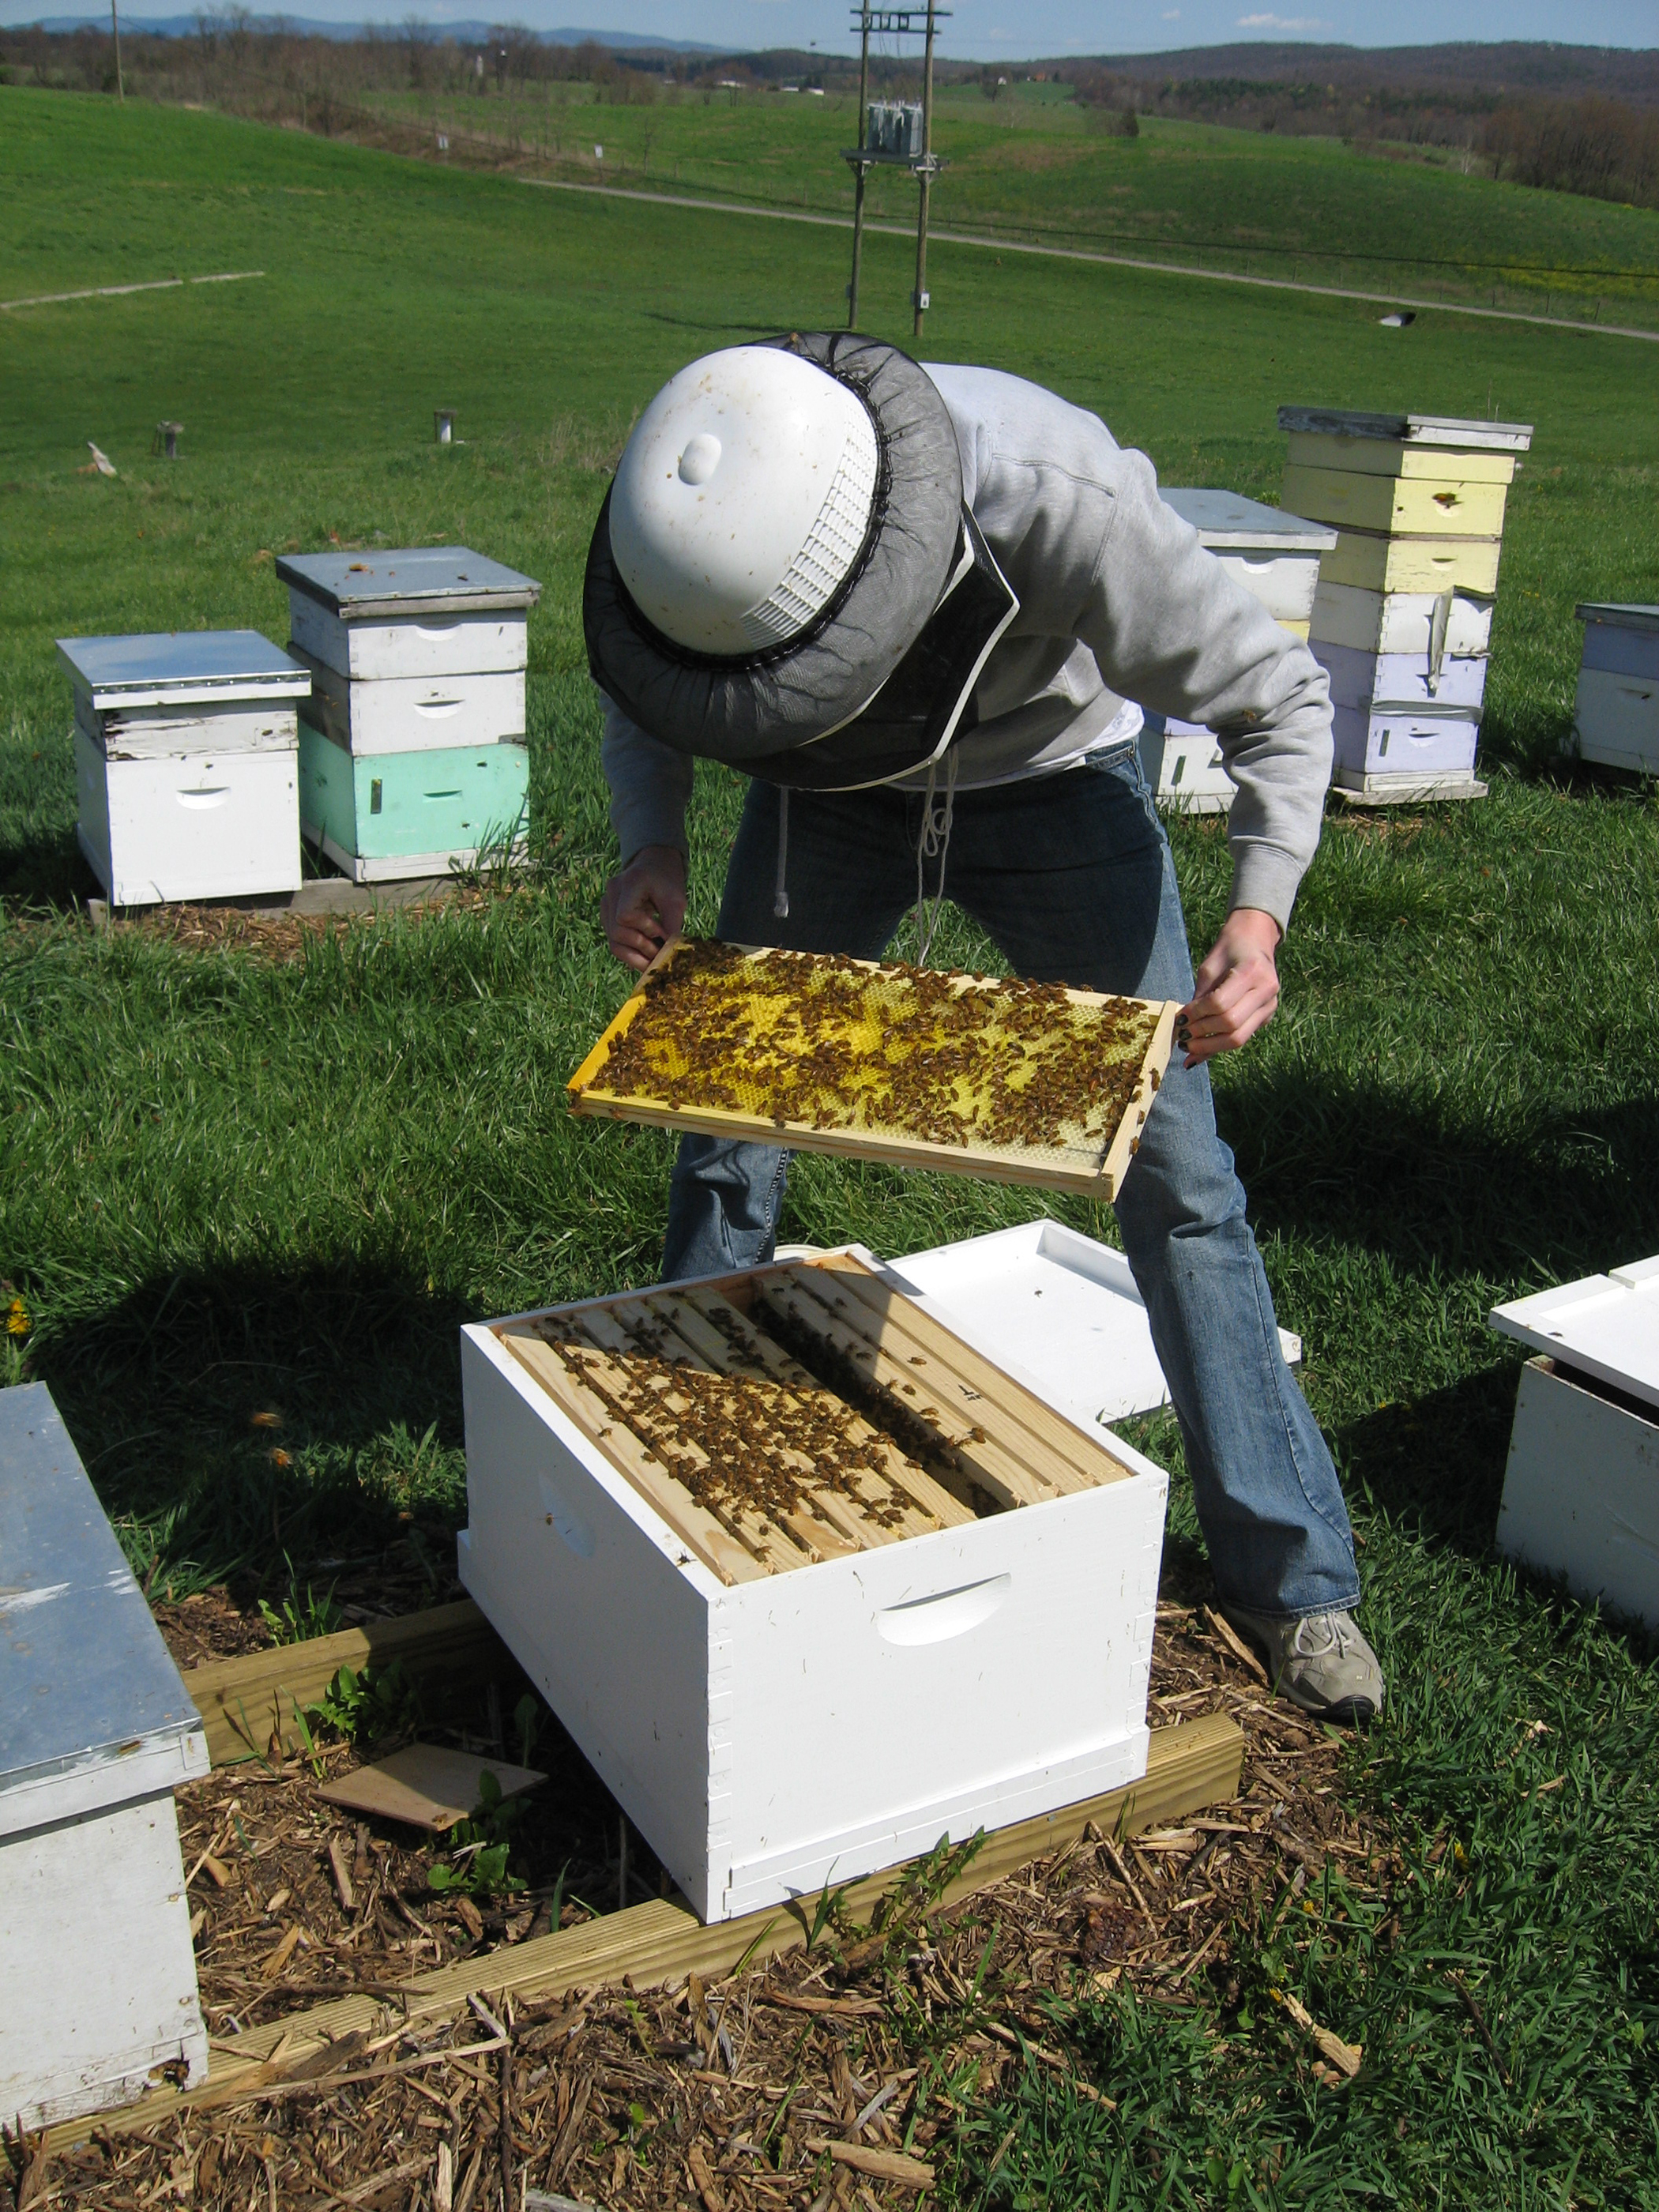 Beekeeper conducting routine hive inspection